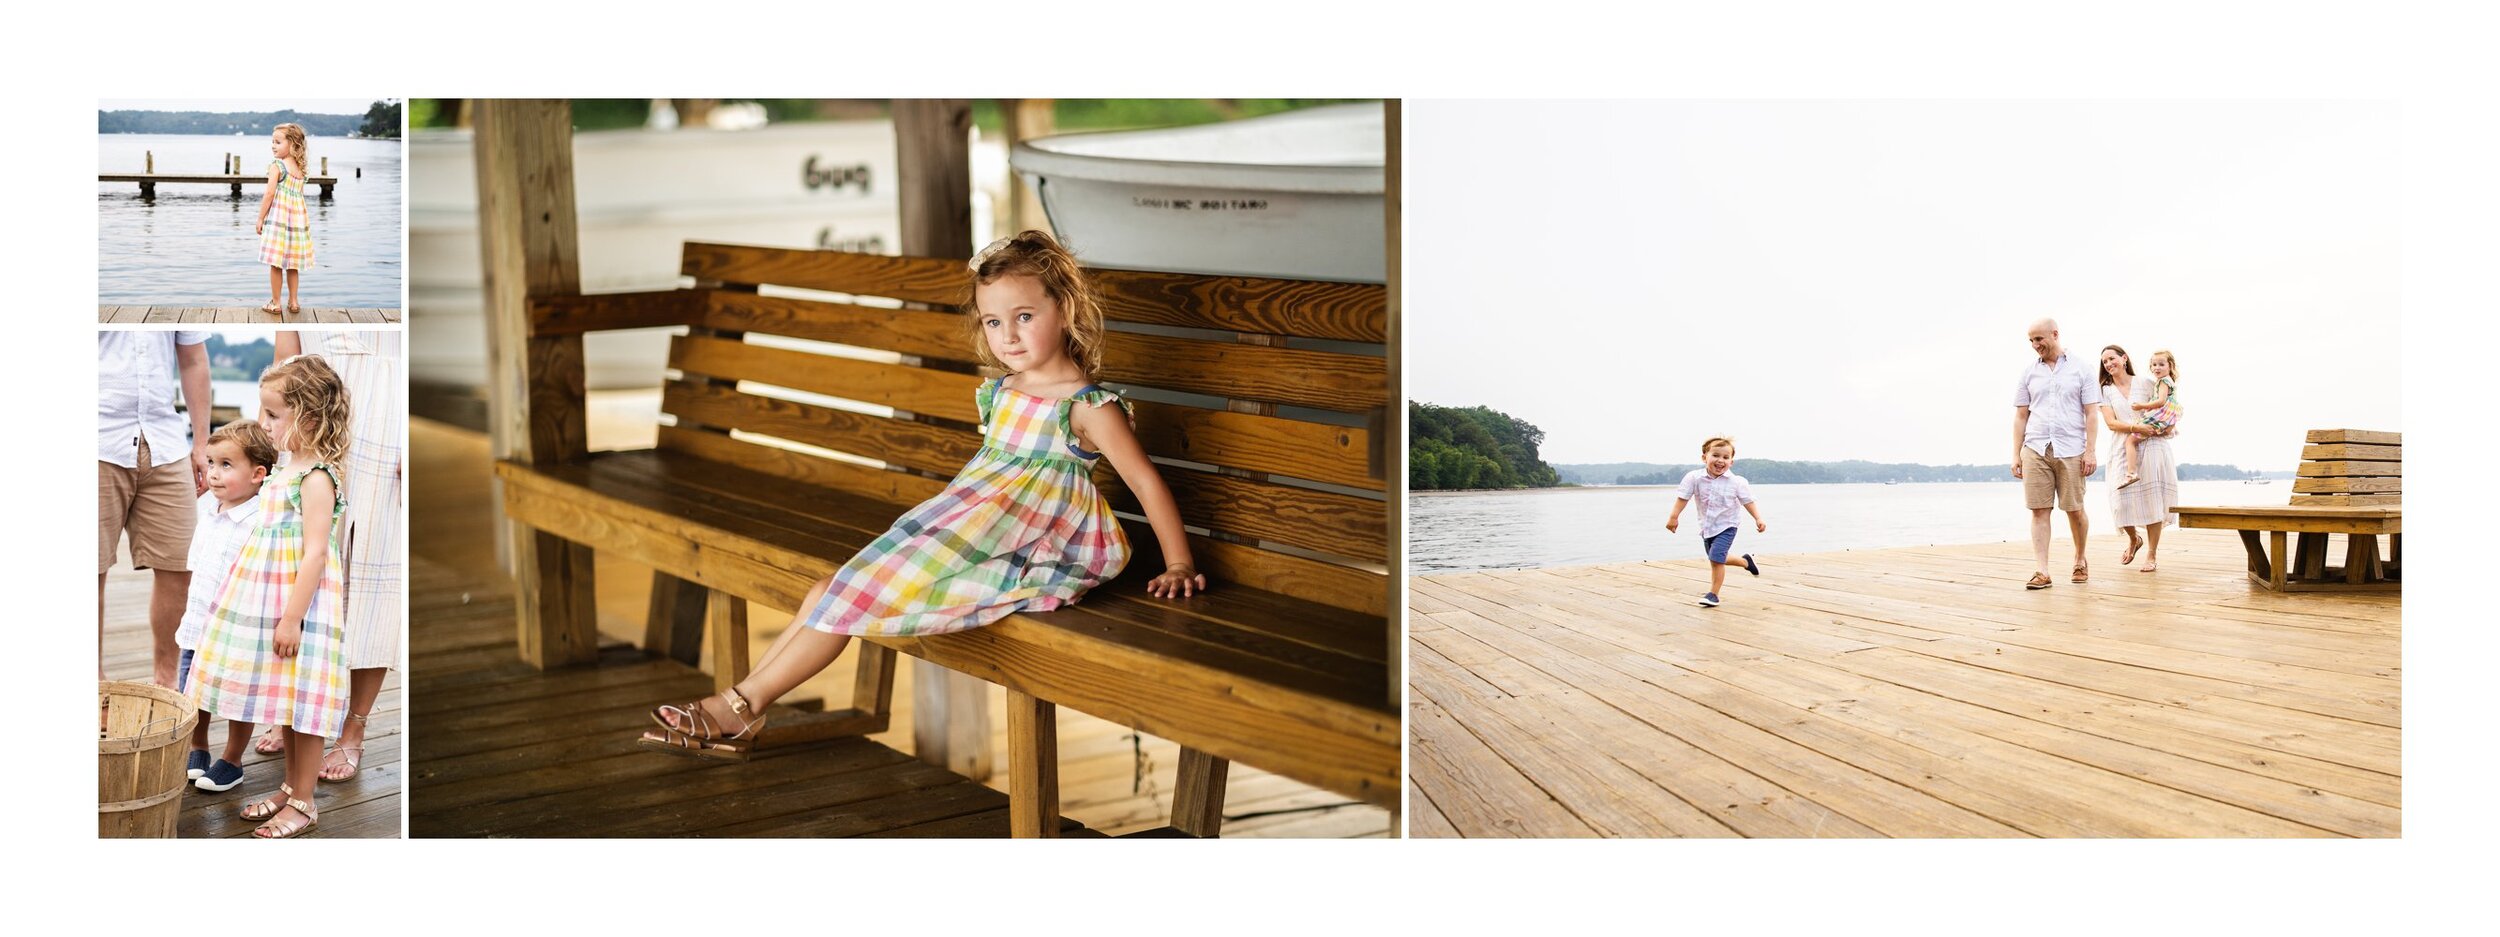 Professional_family_portraits_in_summer_by_water_in_maryland_playful.jpg